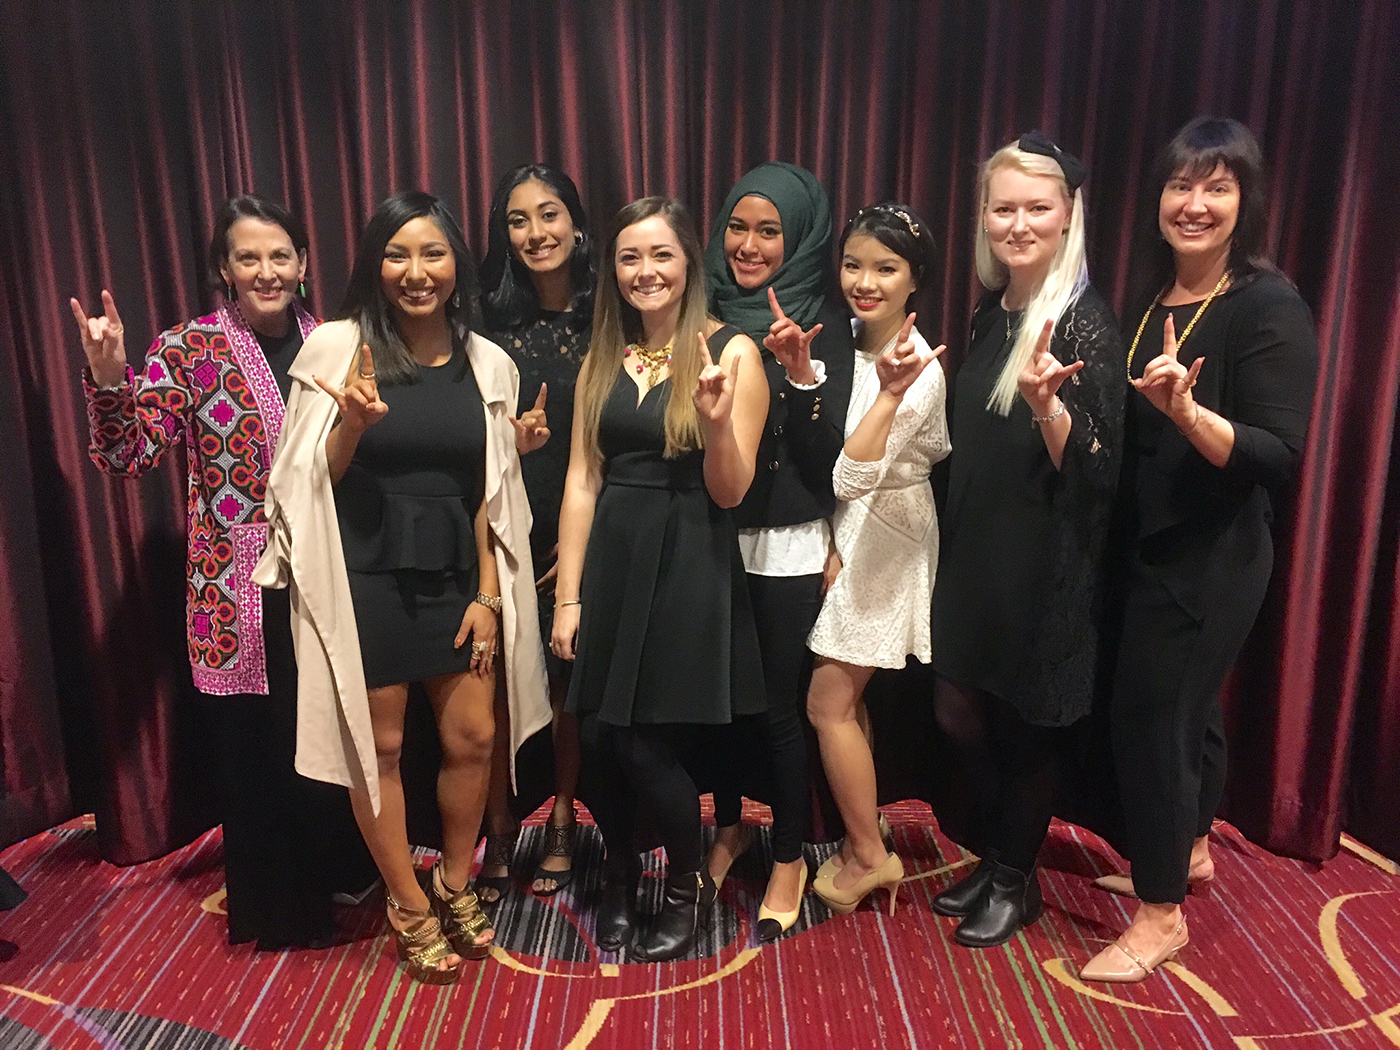 UT textiles and apparel faculty members Nancy Prideaux and Sara Stevens accompanied the scholarship winners to the YMA awards dinner in New York. Left to right: Nancy Prideaux, Debby Garcia, Avani Patel, Clare Moore, Tami Gumilar, Daeci Dinh, Sara Northcutt, and Sara Stevens.